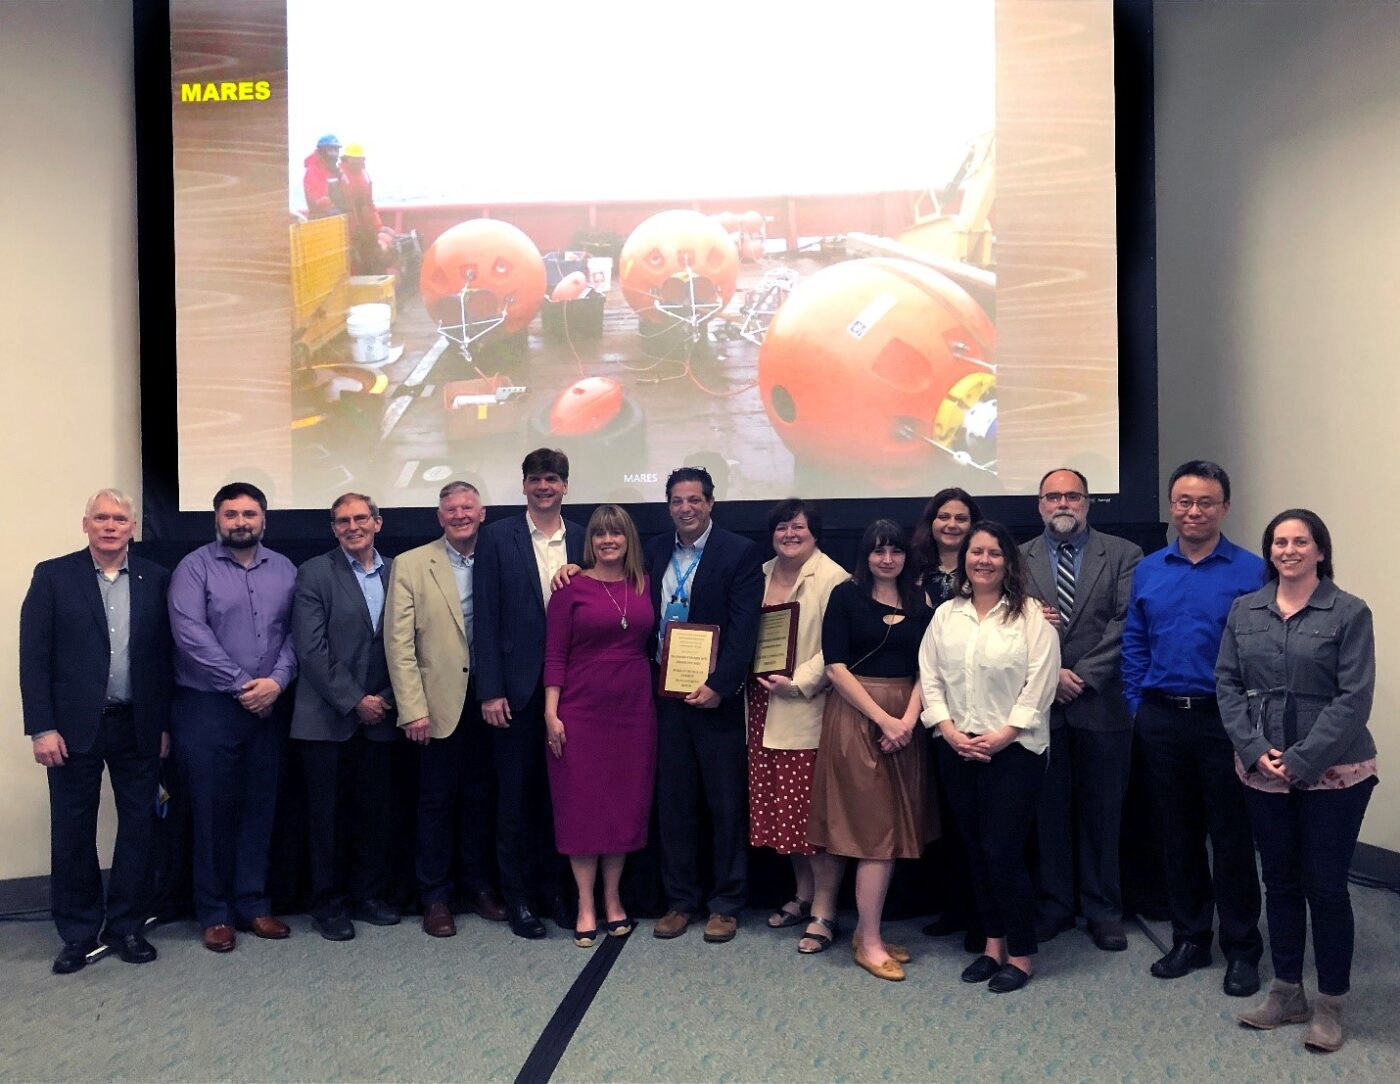 Members of the MARES team at the NOPP Excellence in Partnering Award Ceremony, San Diego, California, Feb 20, 2020